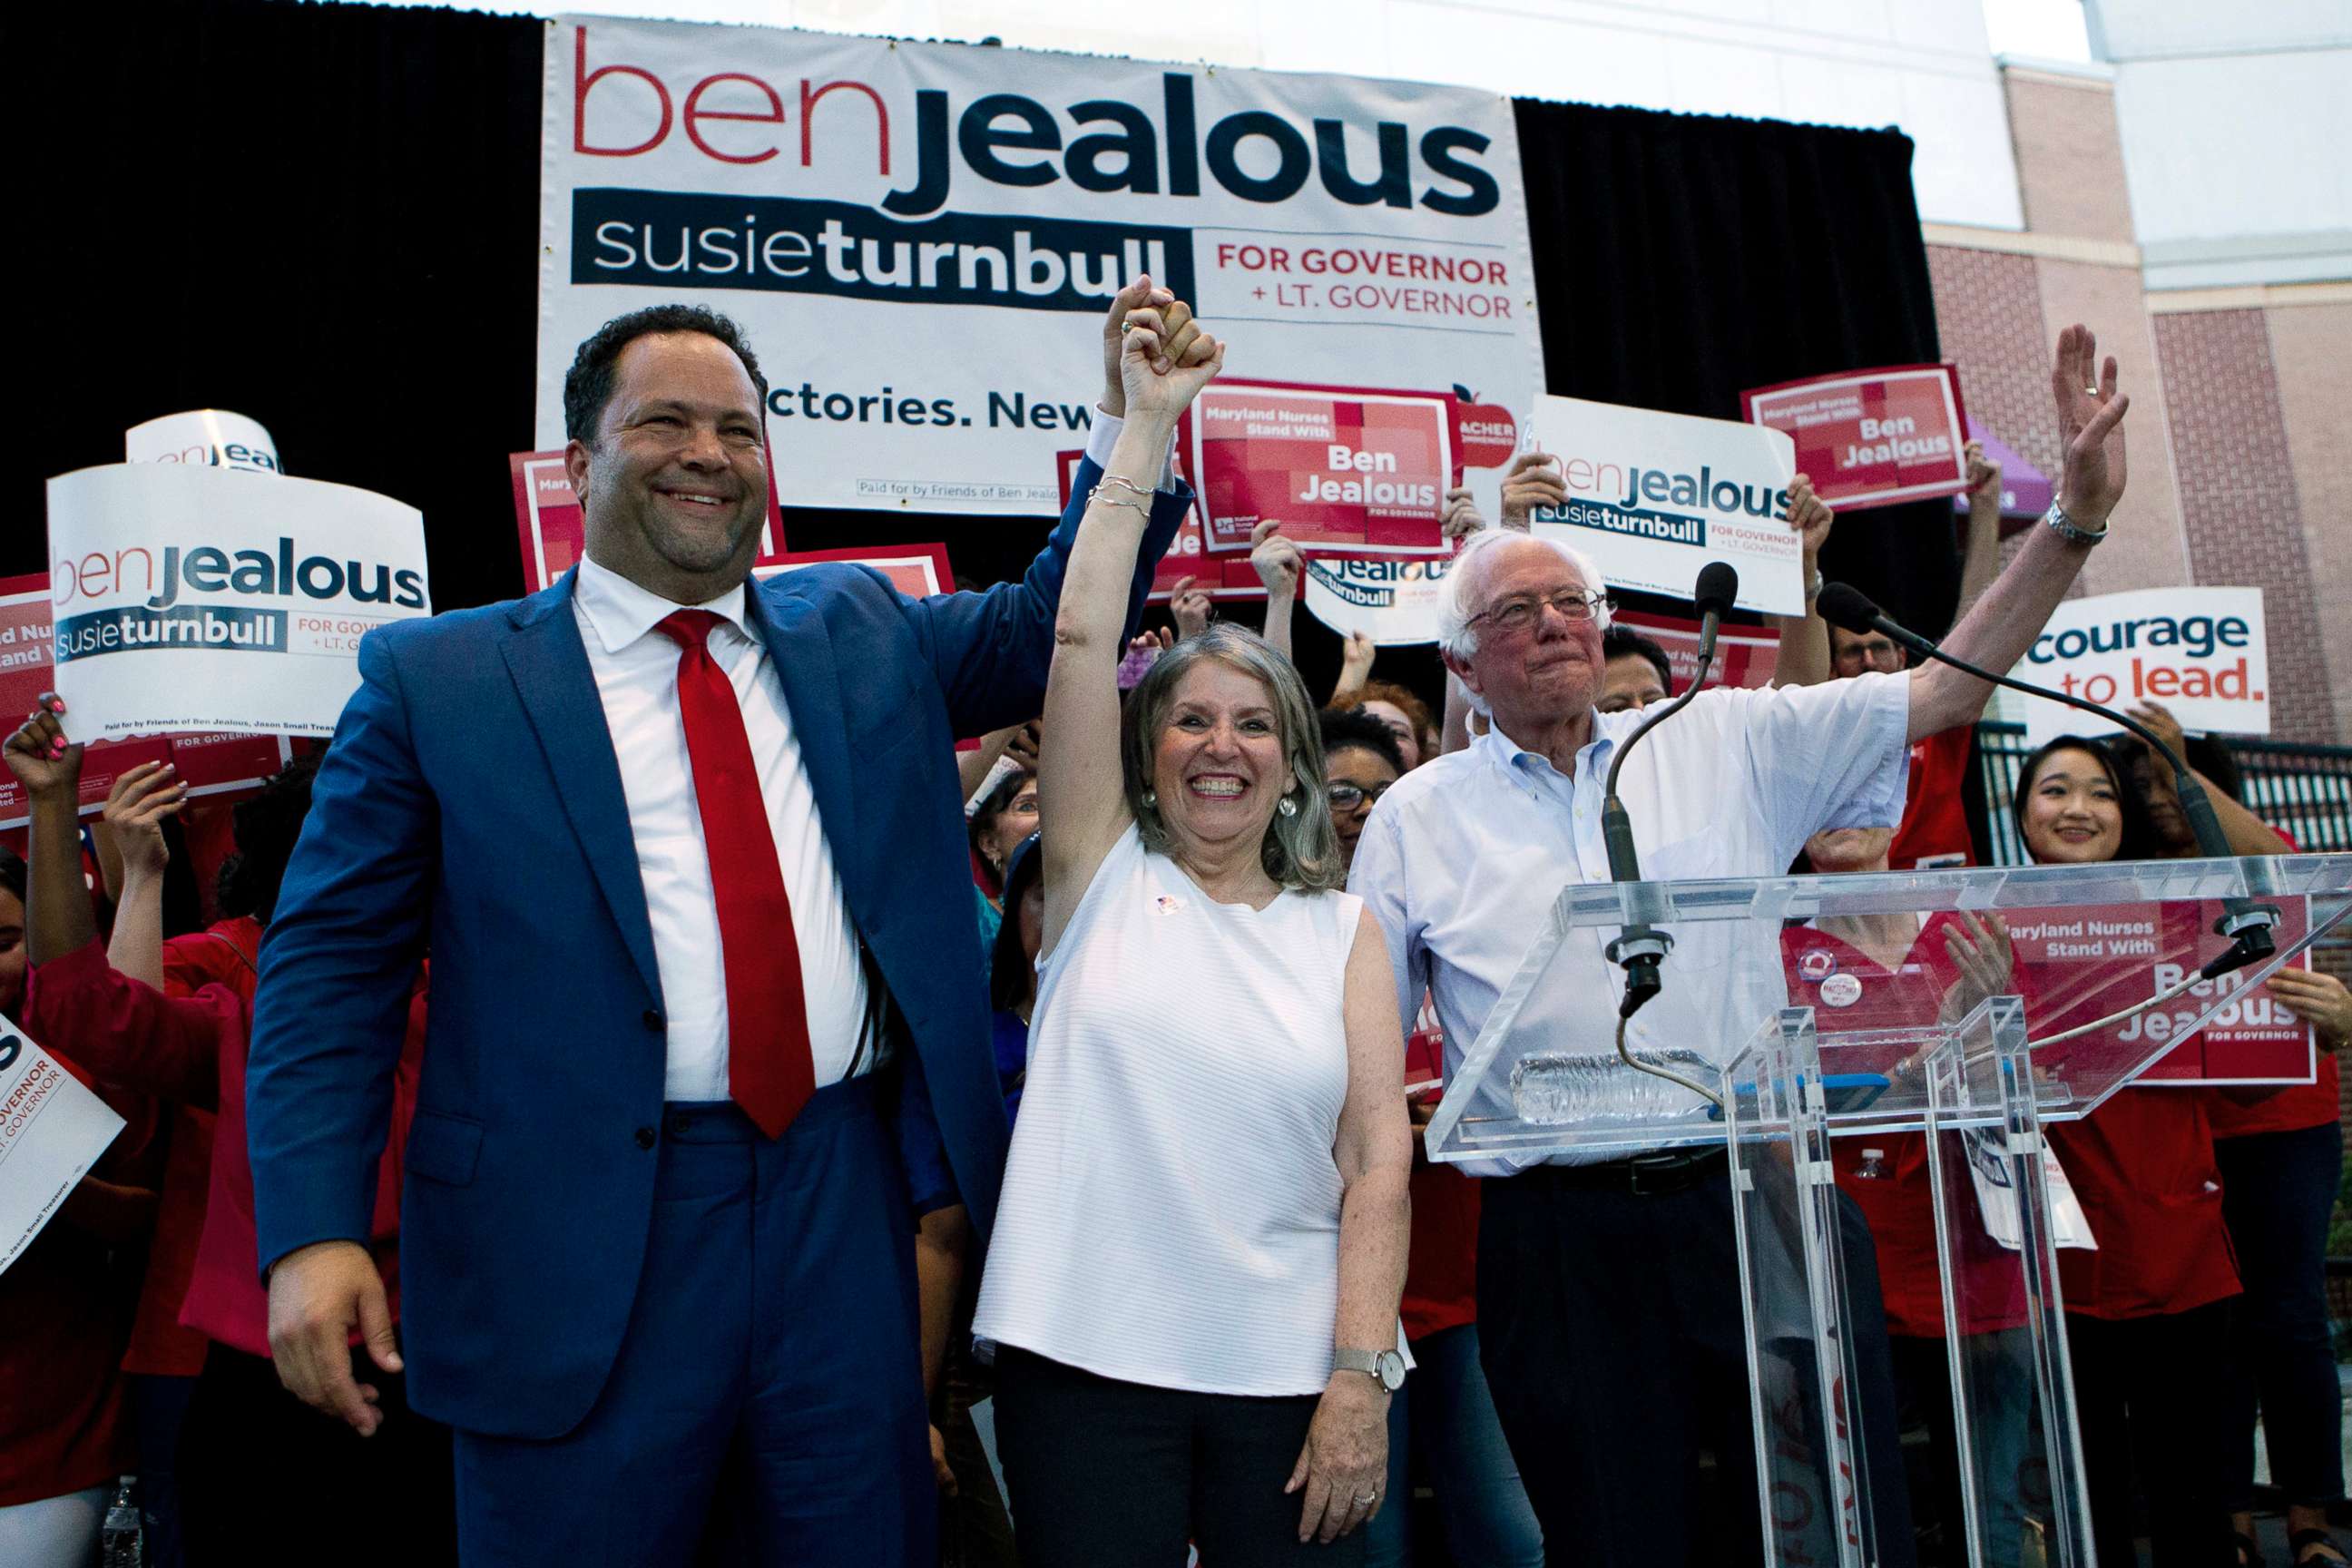 PHOTO: From left, Democrat Ben Jealous raises the hand of his running mate Susie Turnbull while Sen. Bernie Sanders waves during a gubernatorial campaign rally in Maryland's Democratic primary in downtown Silver Spring, Md., June 18, 2018.